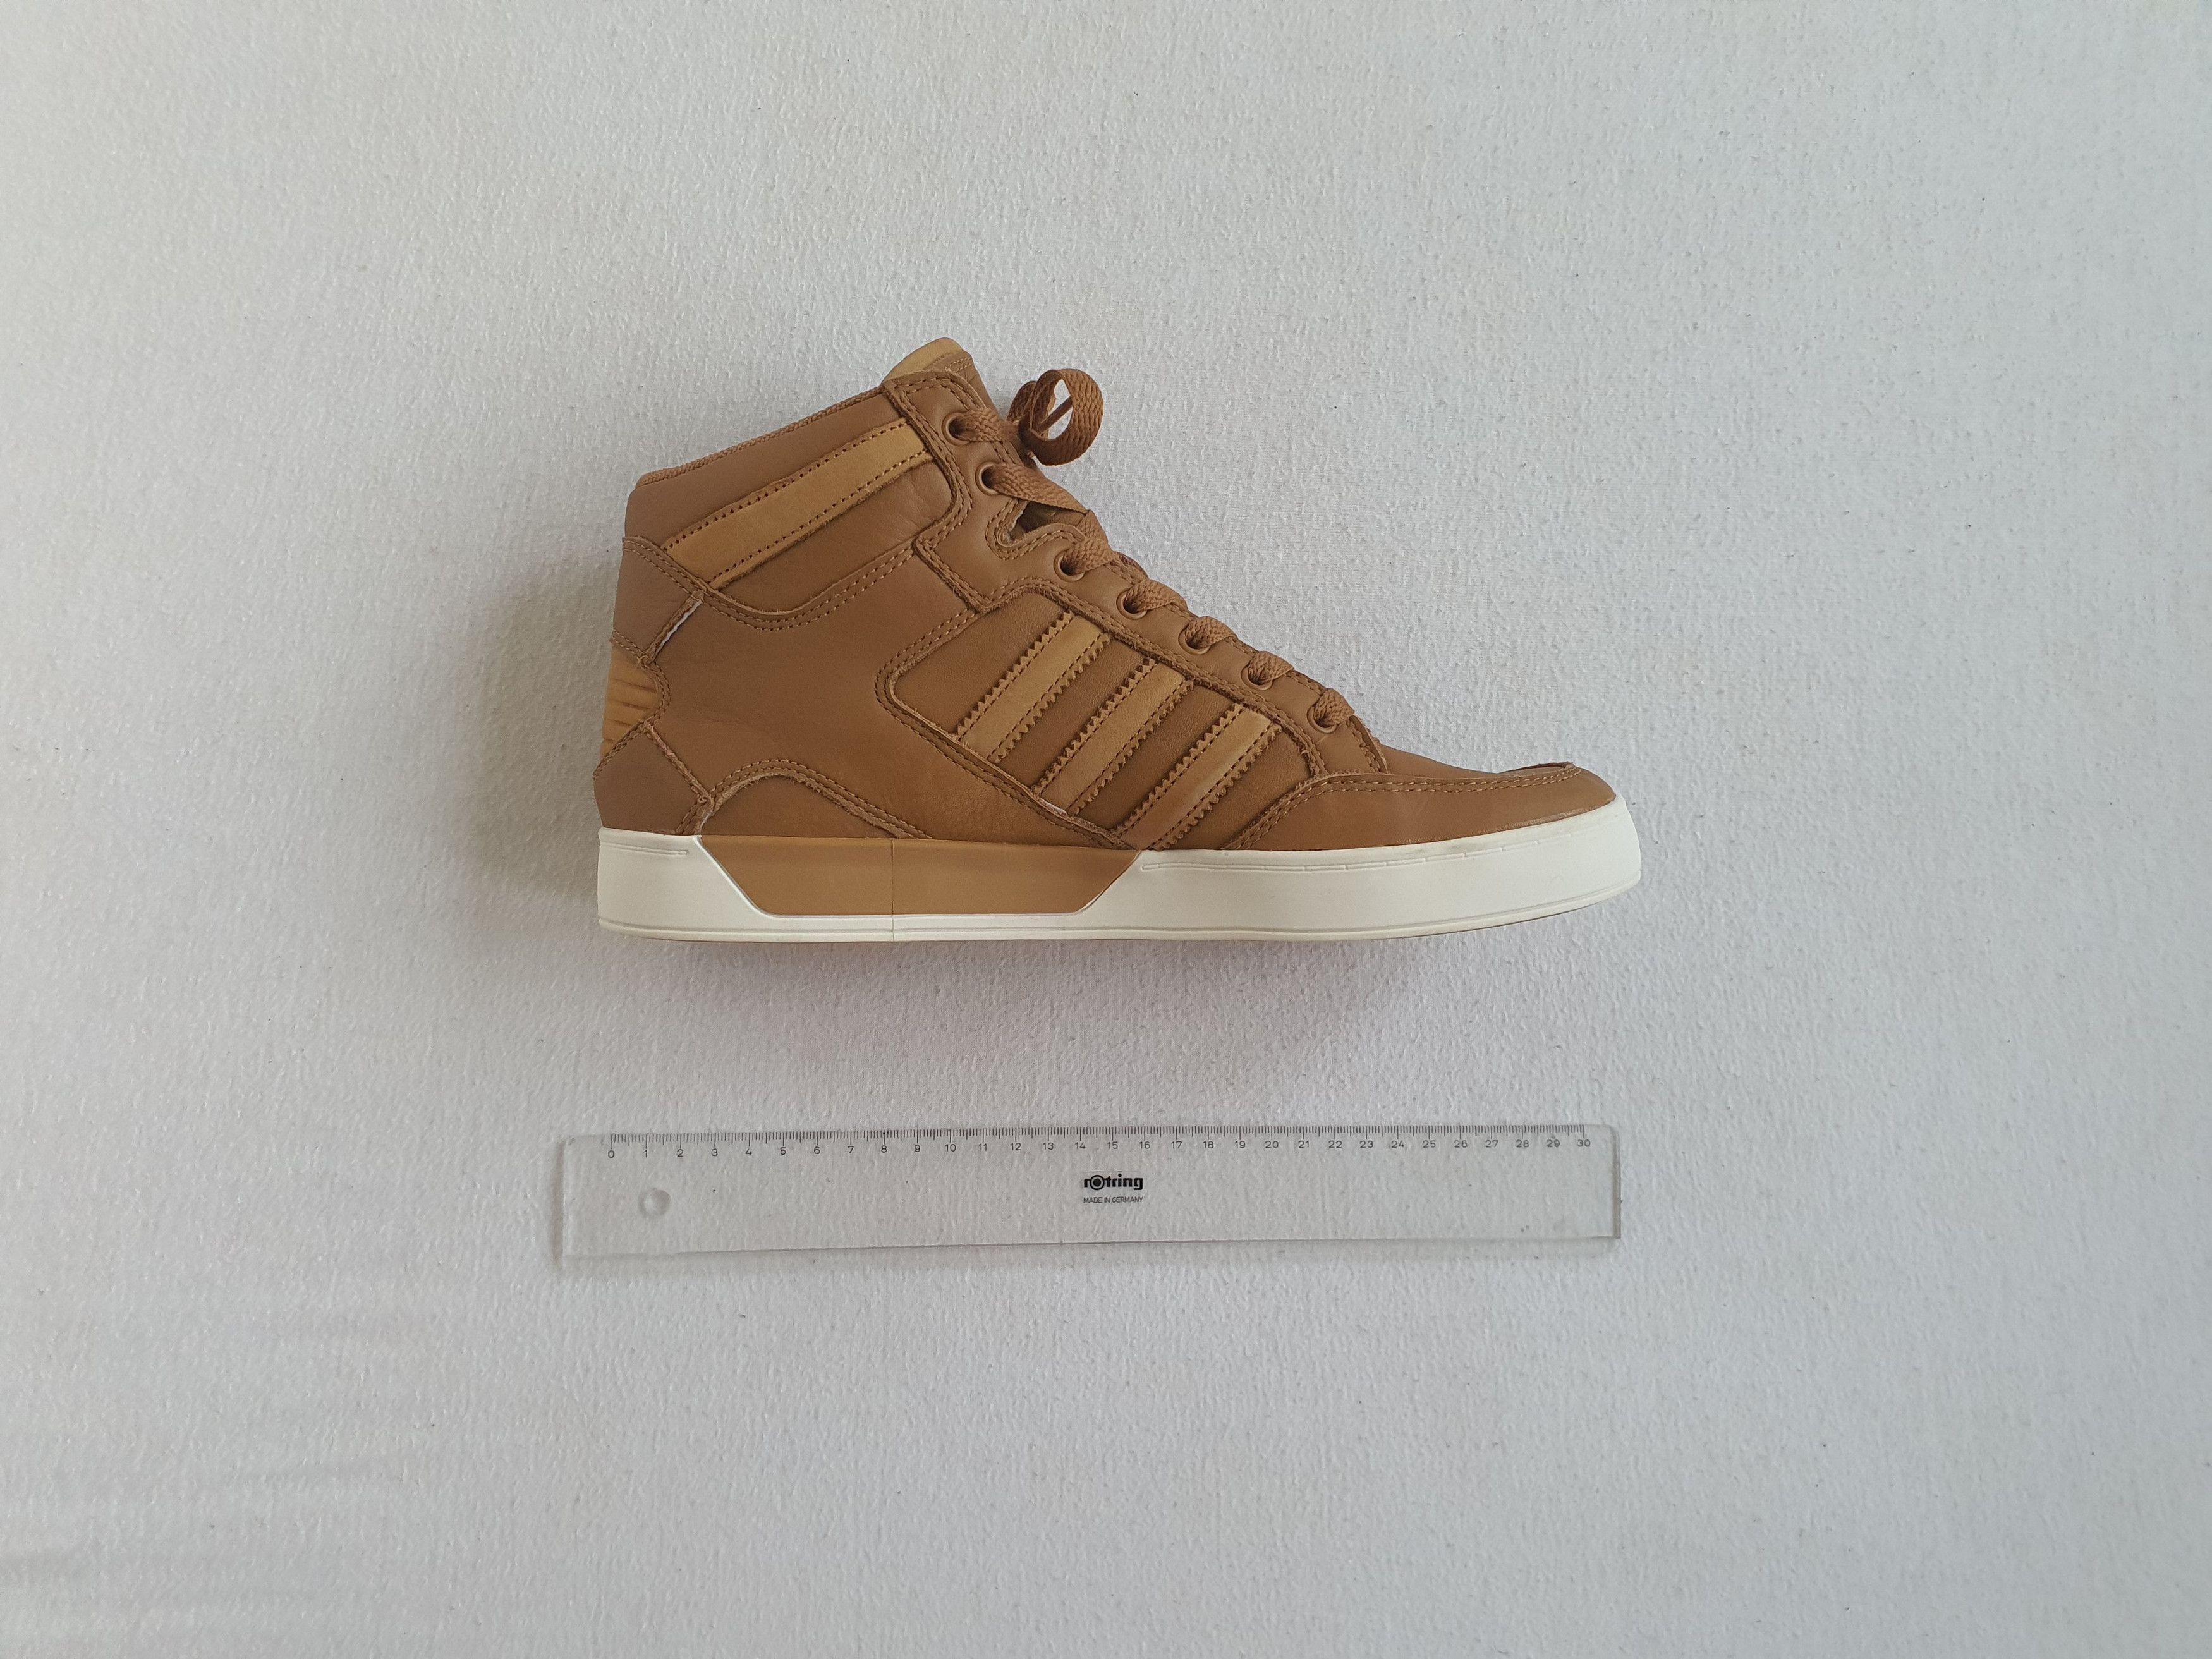 Adidas ''HARD COURT HI'' (BB6781) High Top Sneakers Size US 9.5 / EU 42-43 - 11 Preview